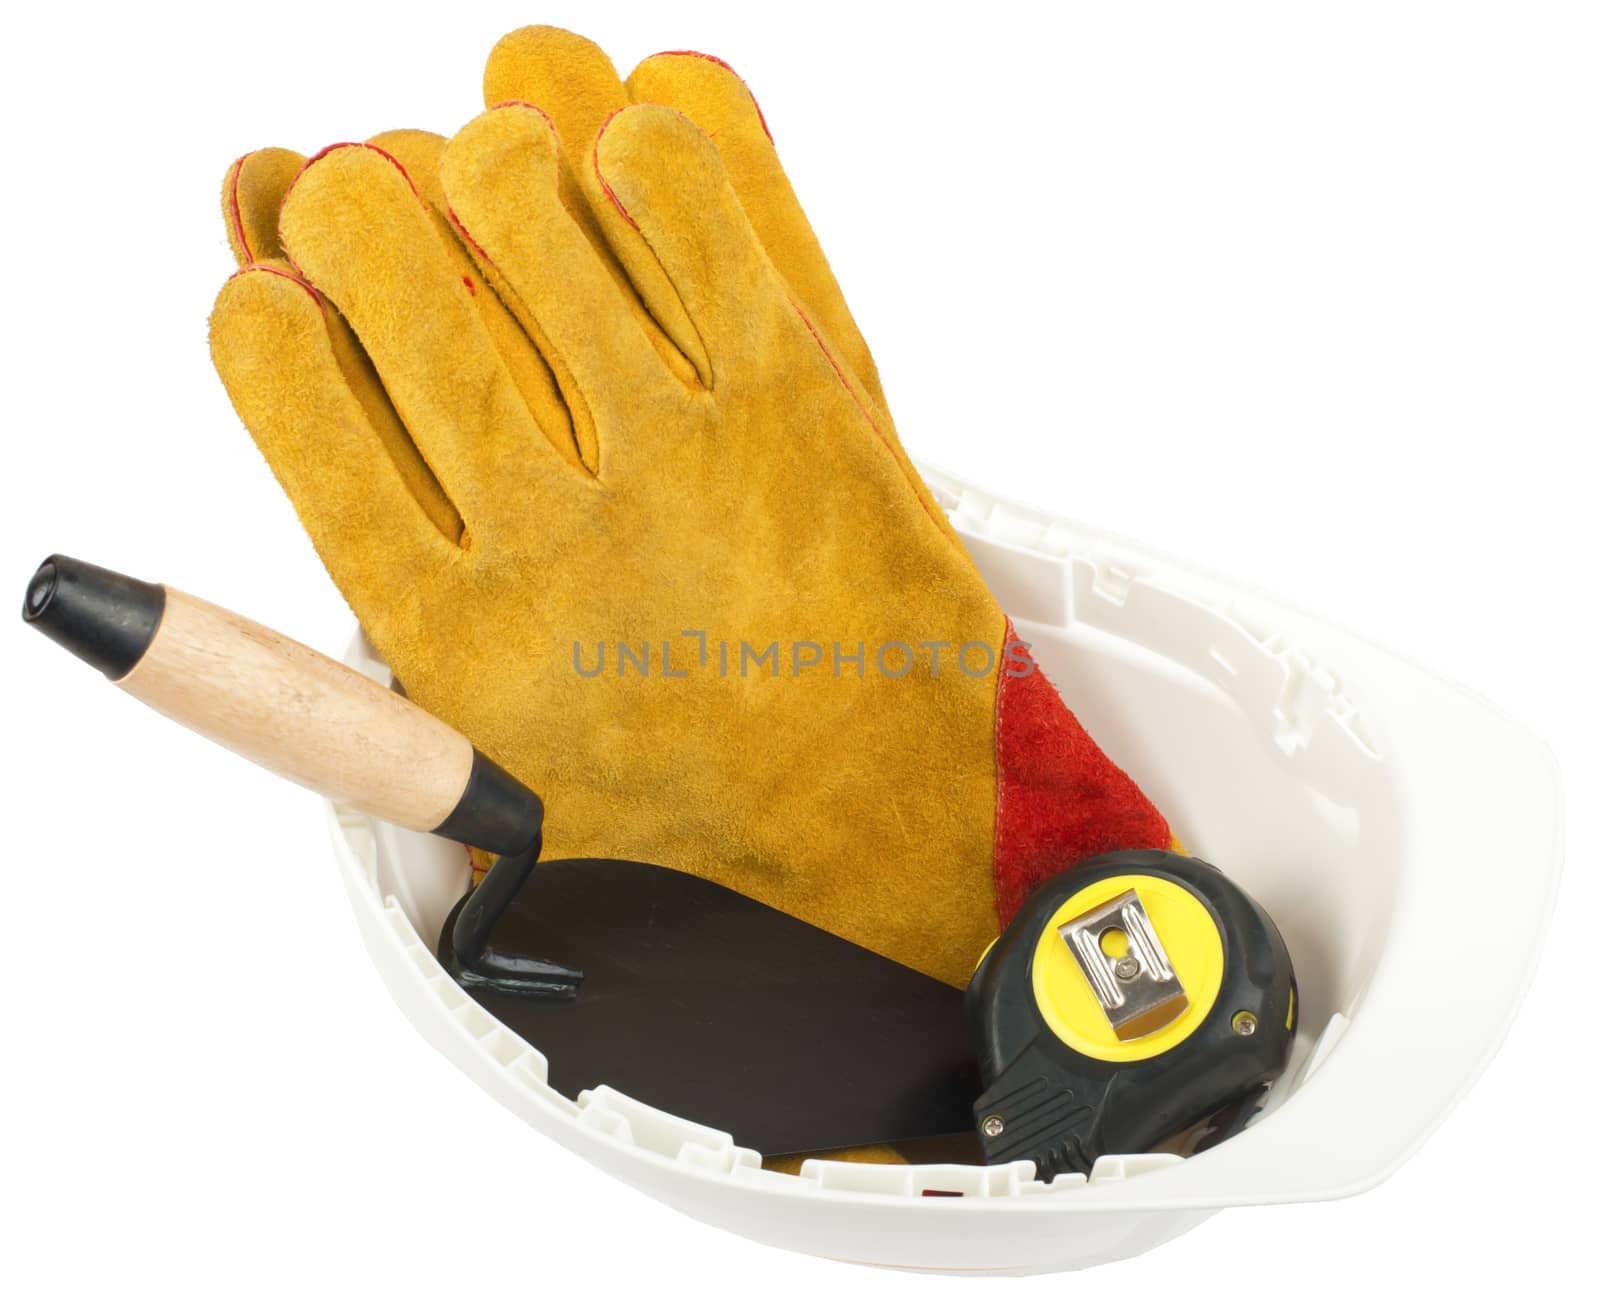 Construction worker supplies including hard hat and gloves on isolated white background